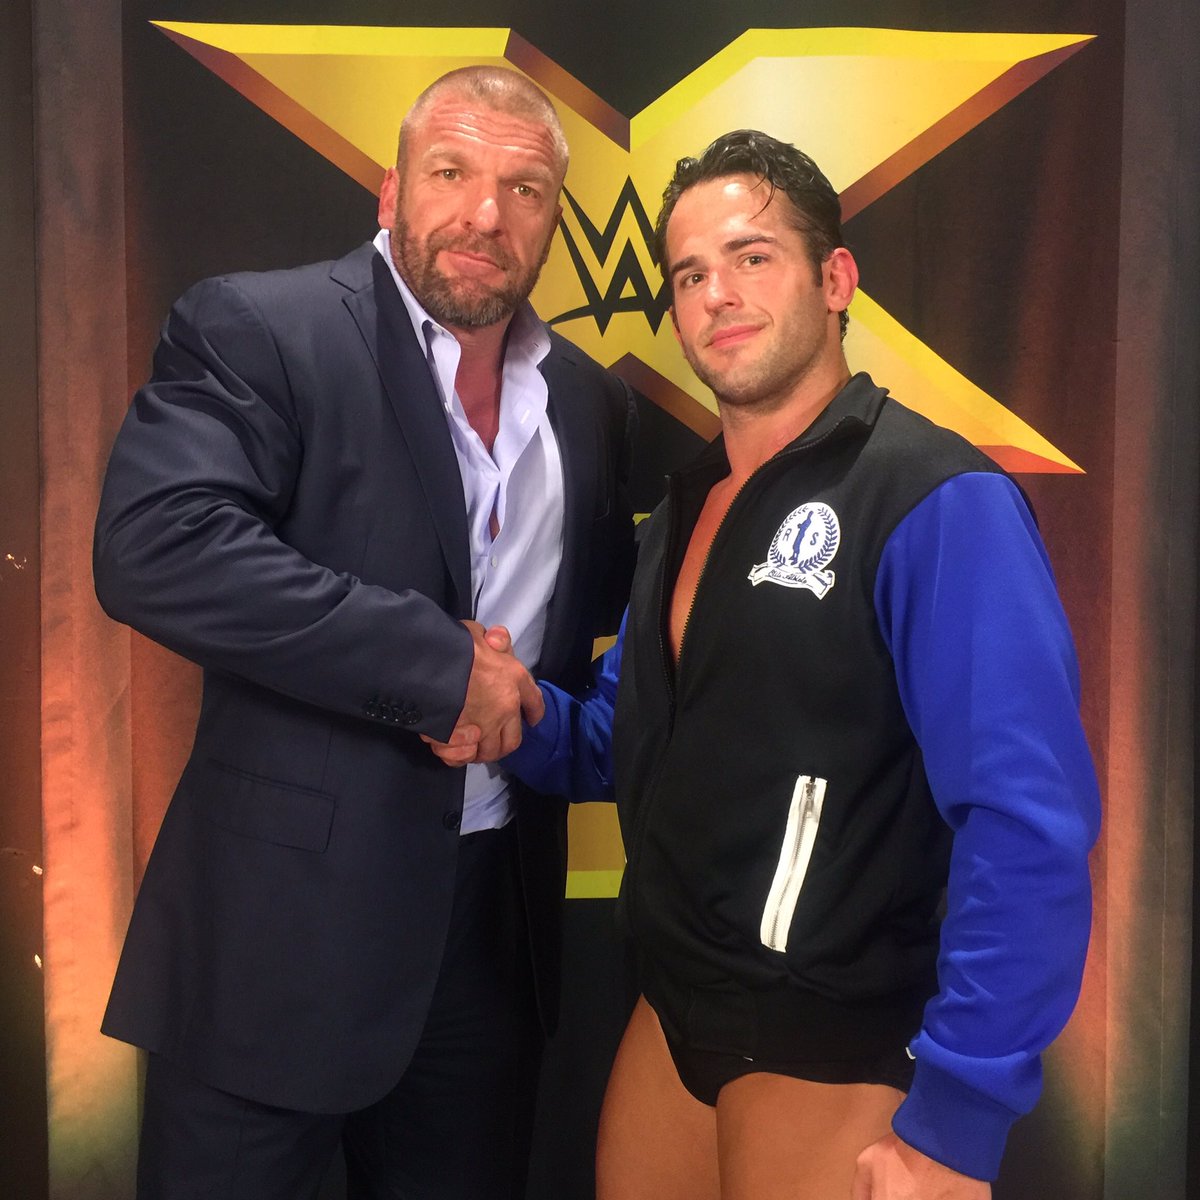 RT @TripleH: When you get the call....answer it. Pleased to have @roderickstrong debut in @WWENXT. https://t.co/otCCi2eKyK